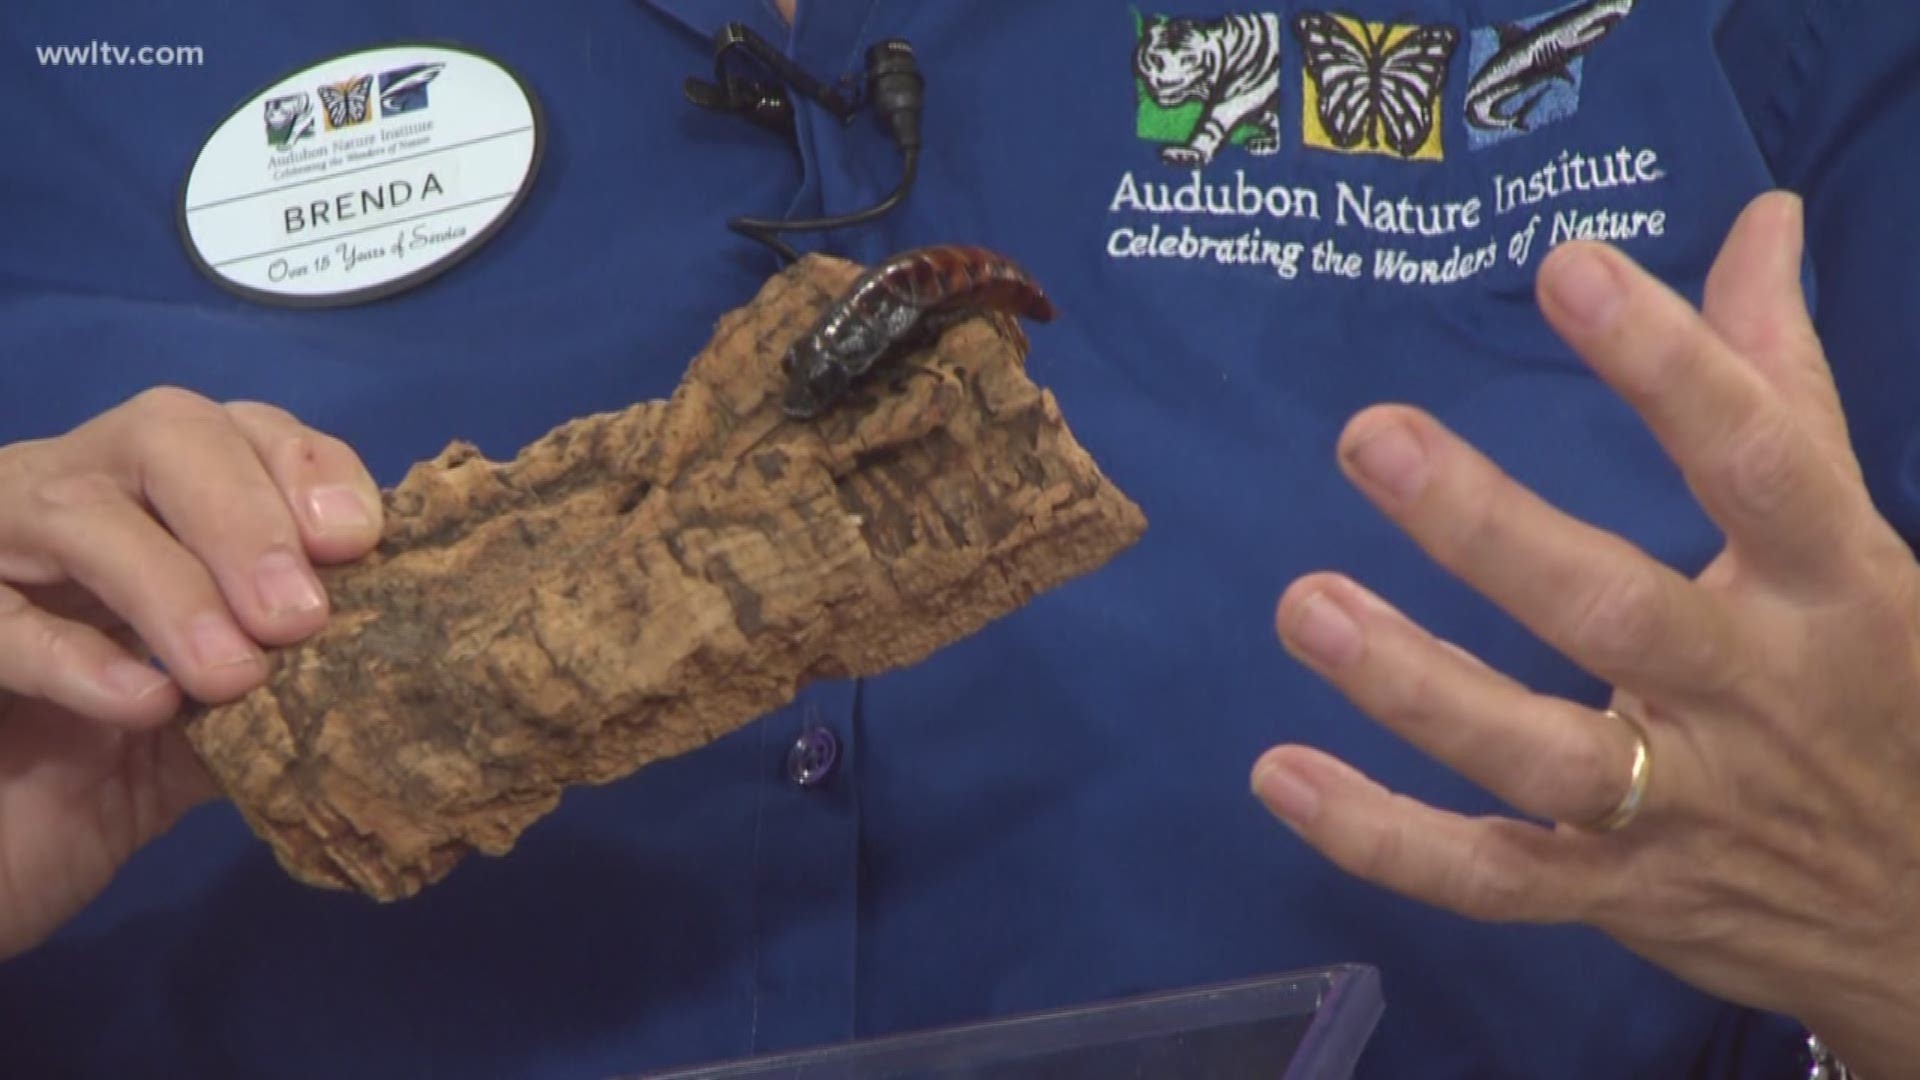 Brenda Walkenhorst has brought in some Hissing Cockroaches to celebrate the birthday of Audubon Institutes.